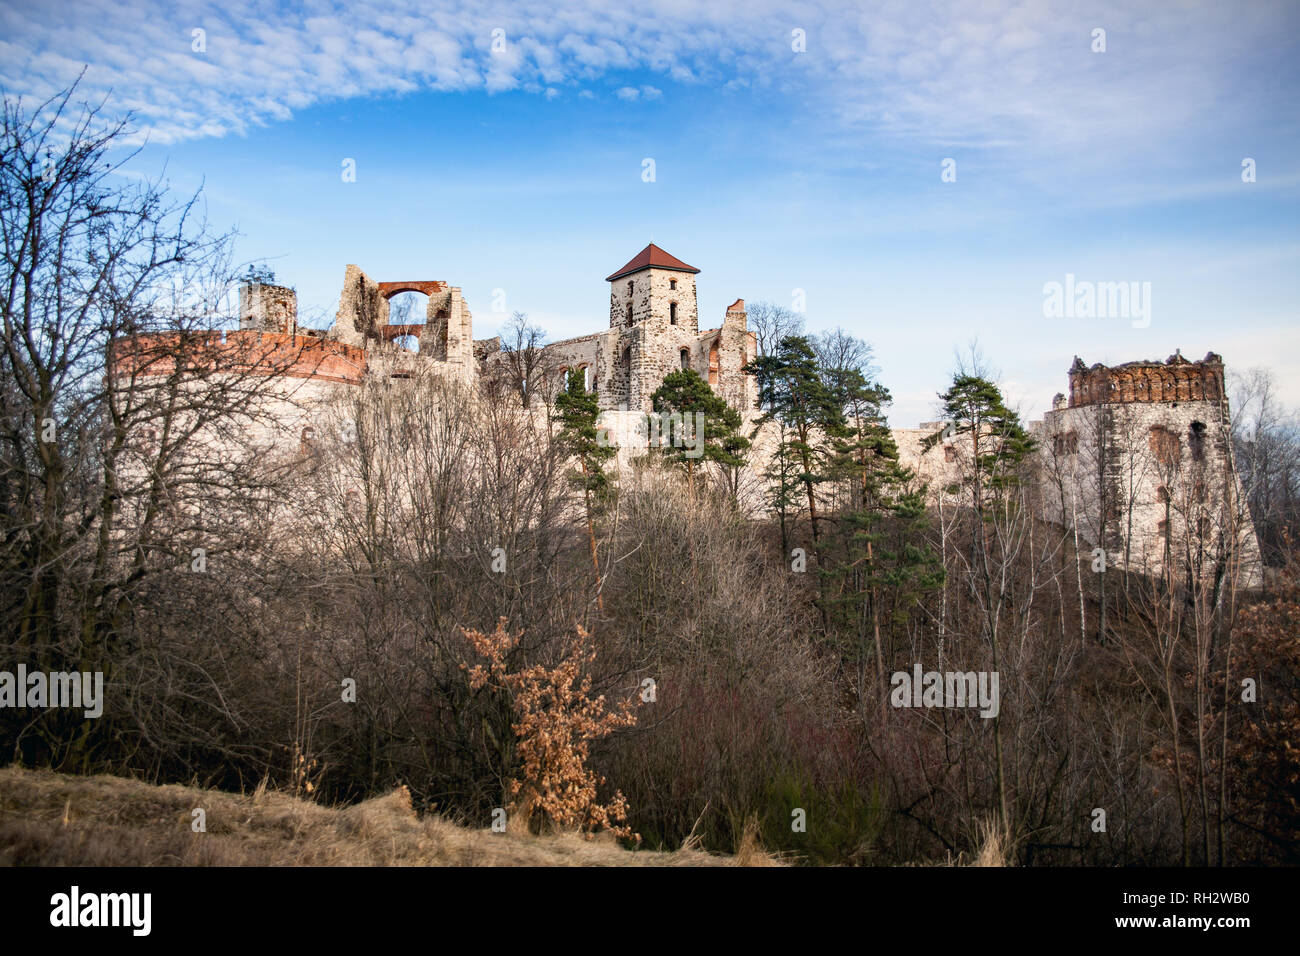 Castle Tenczyn. Ruins old medieval castle in Rudno, Poland. Characteristic type of construction the castle in the style of eagle nests. Stock Photo